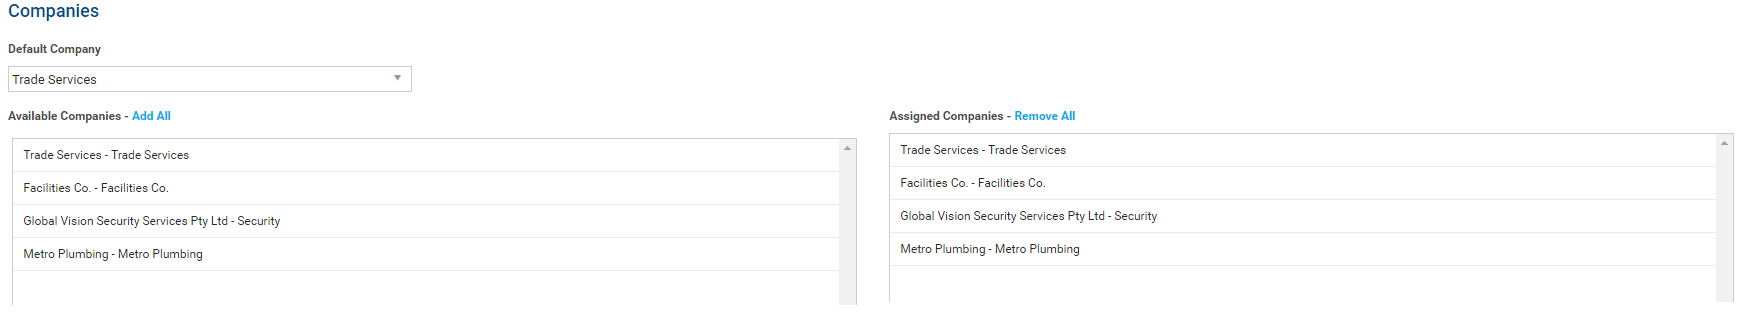 A screenshot of an employee assigned to different companies.